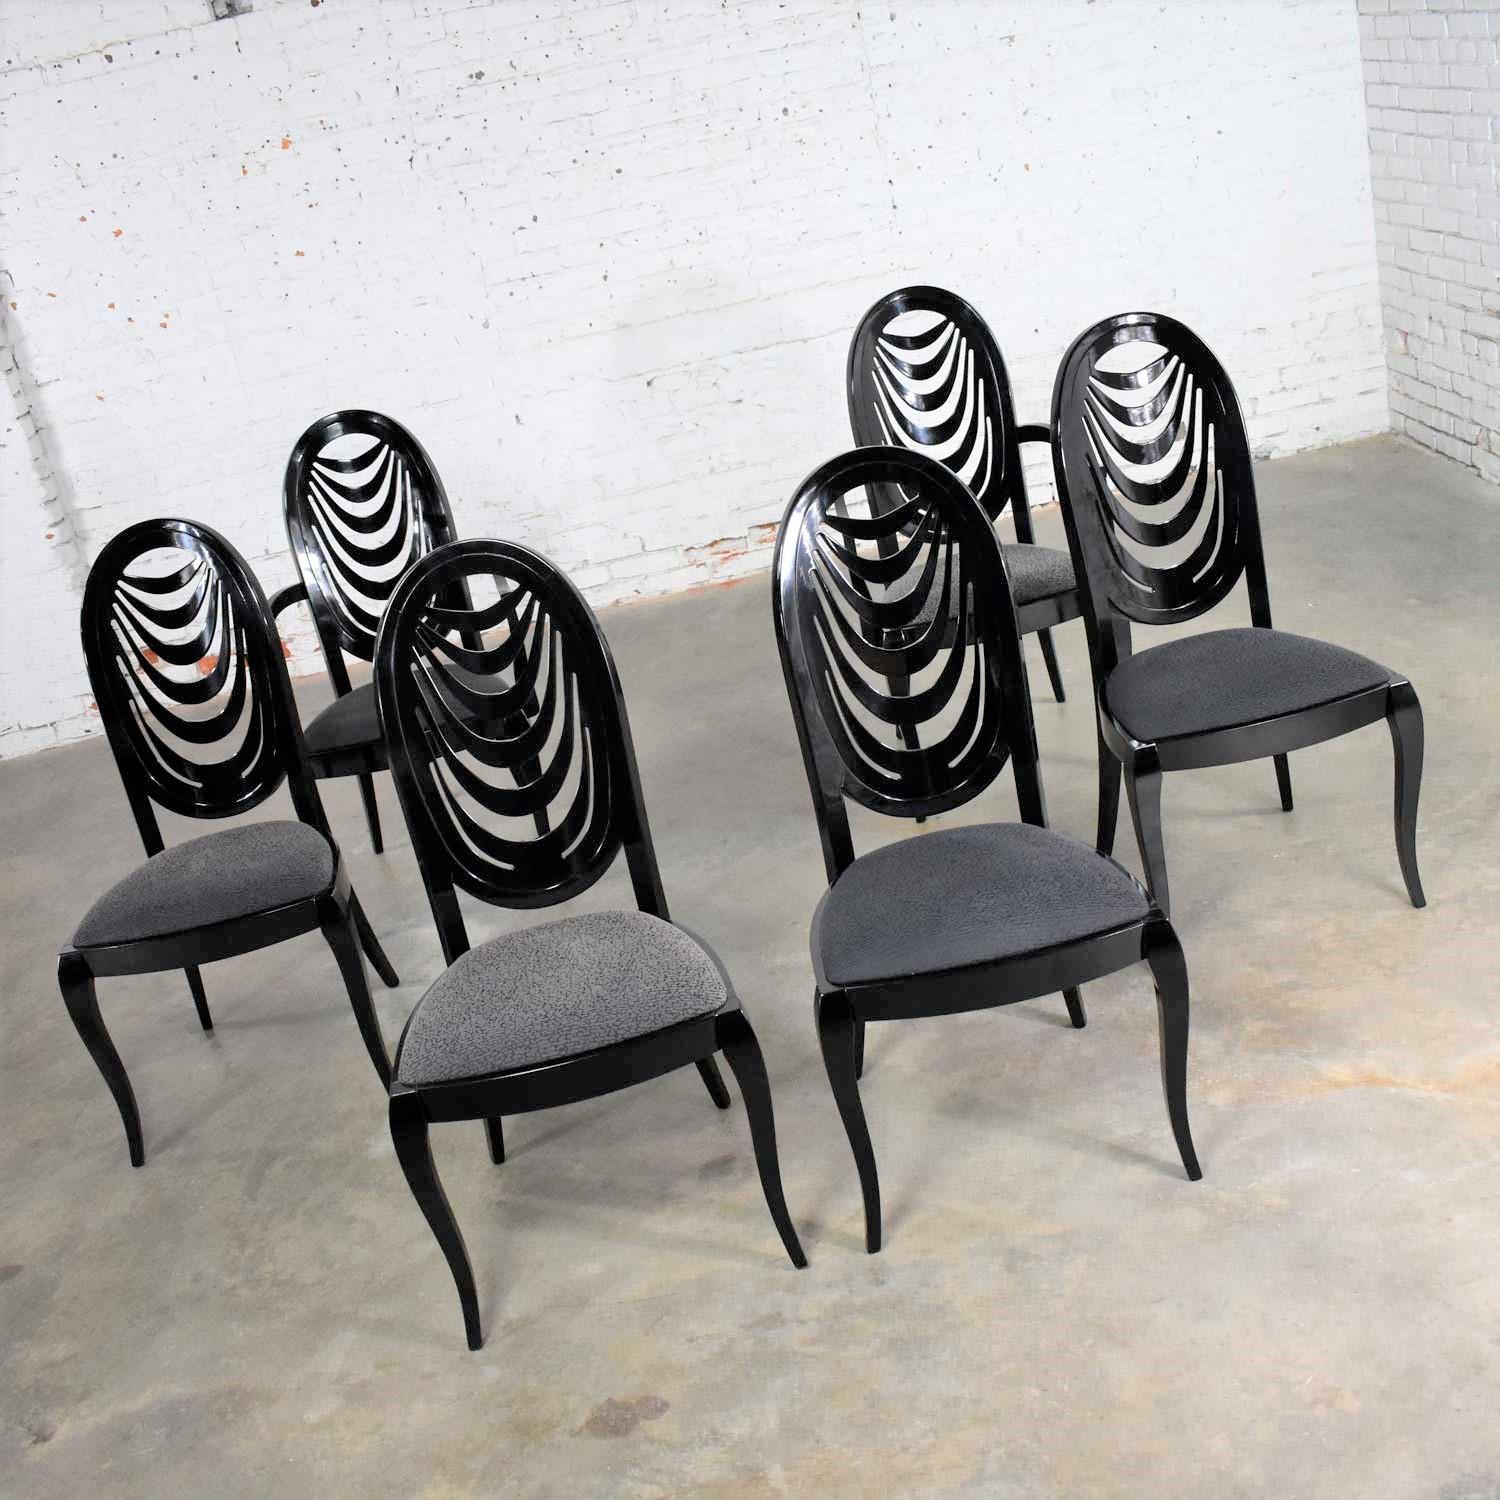 Incredible set of six black lacquer dining chairs with an oval drape back design by Pietro Costantini for Ello. There are four side chairs and two captain’s or armed chairs. They are in wonderful condition. There were age related nicks and dings to